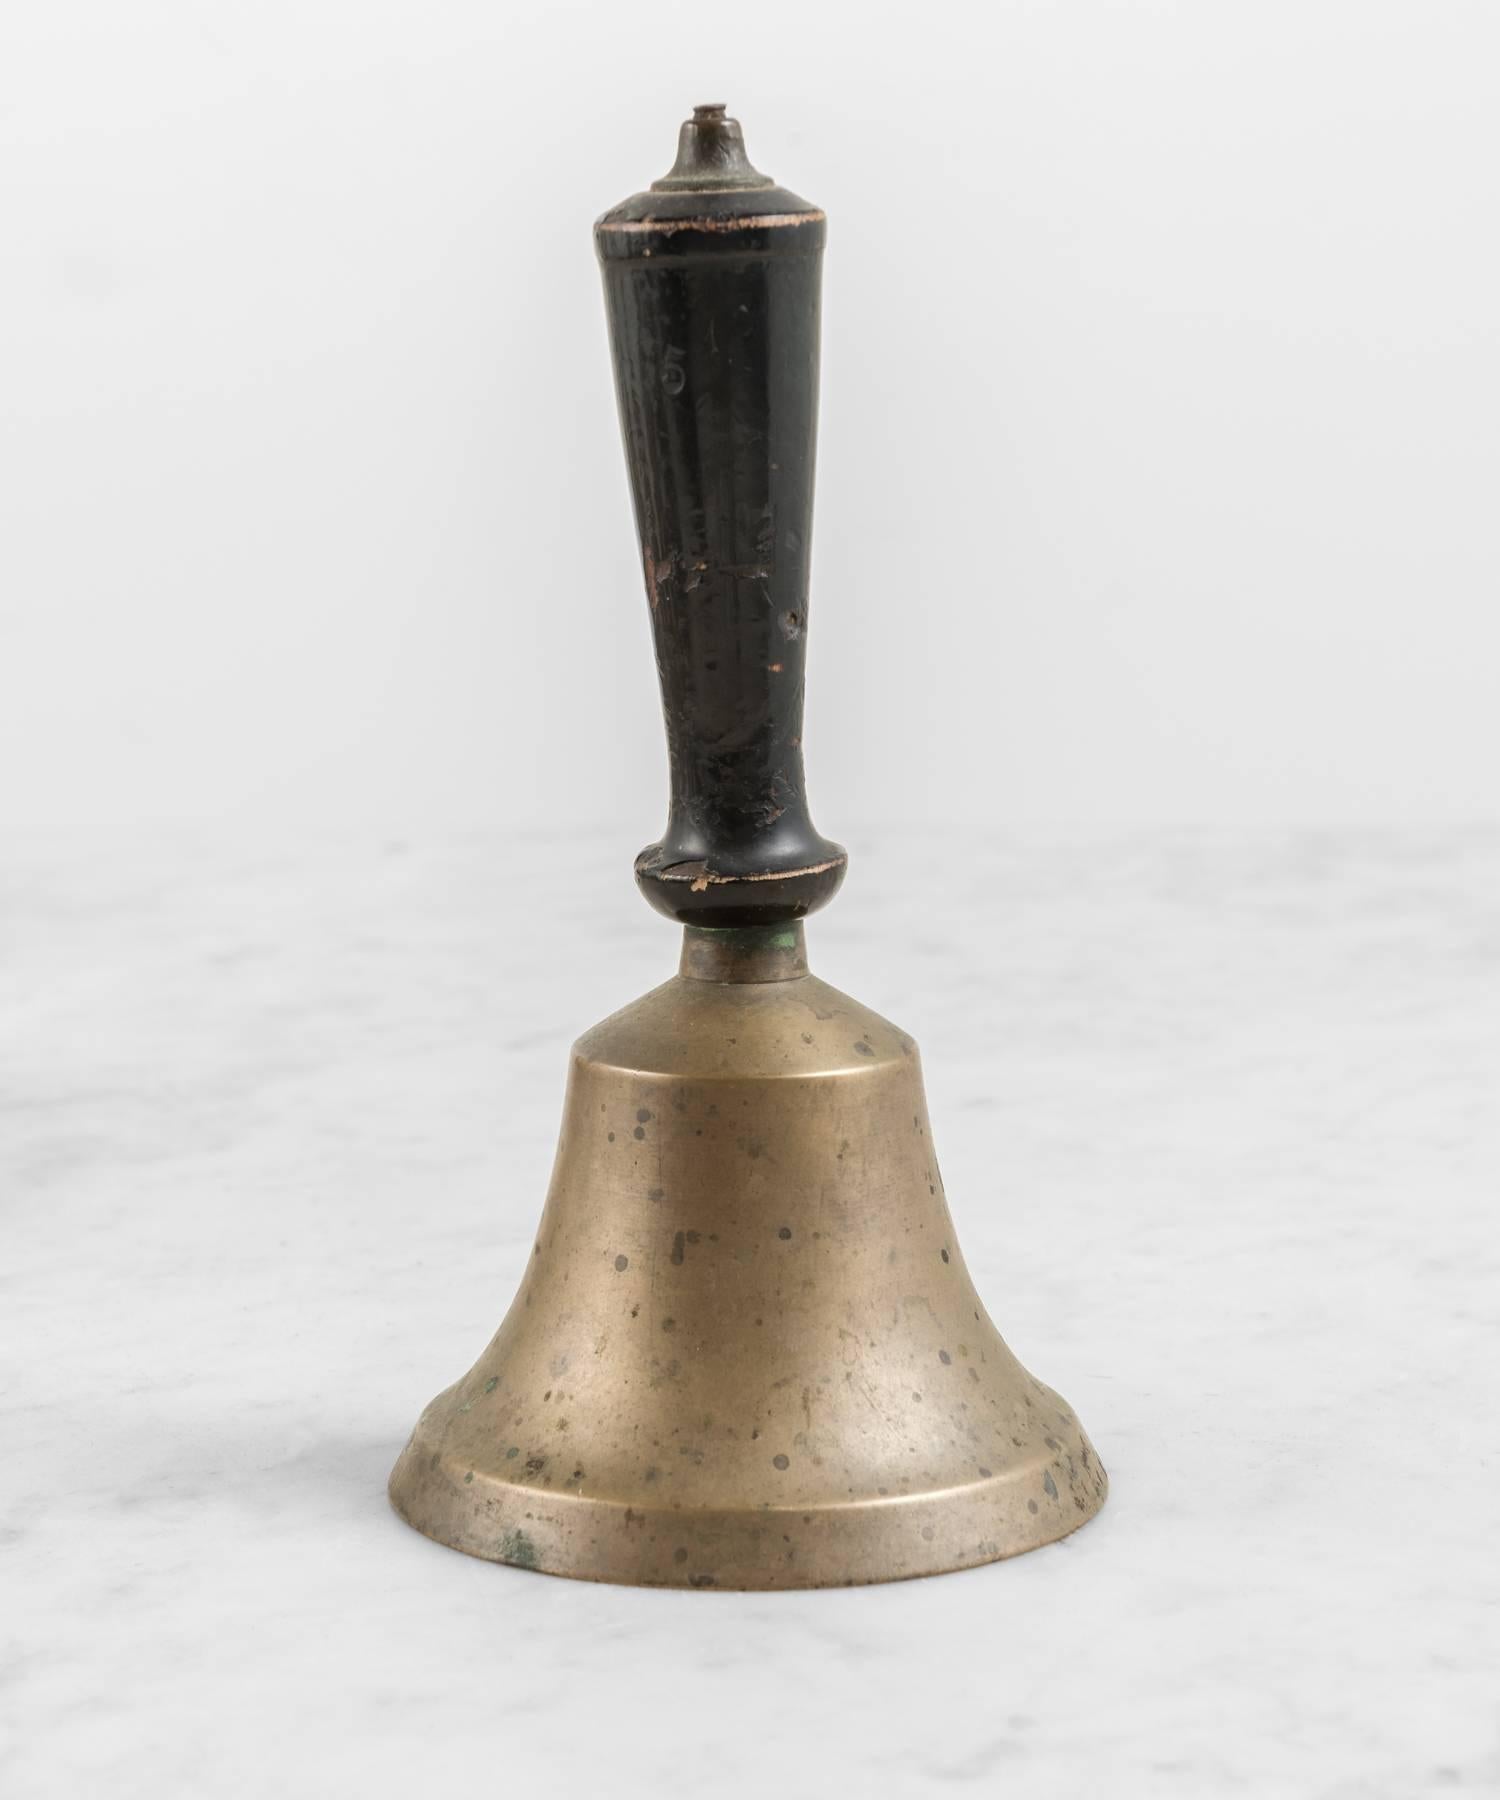 Medium Sized Bell with Wooden Handle, circa 1900-1940 3